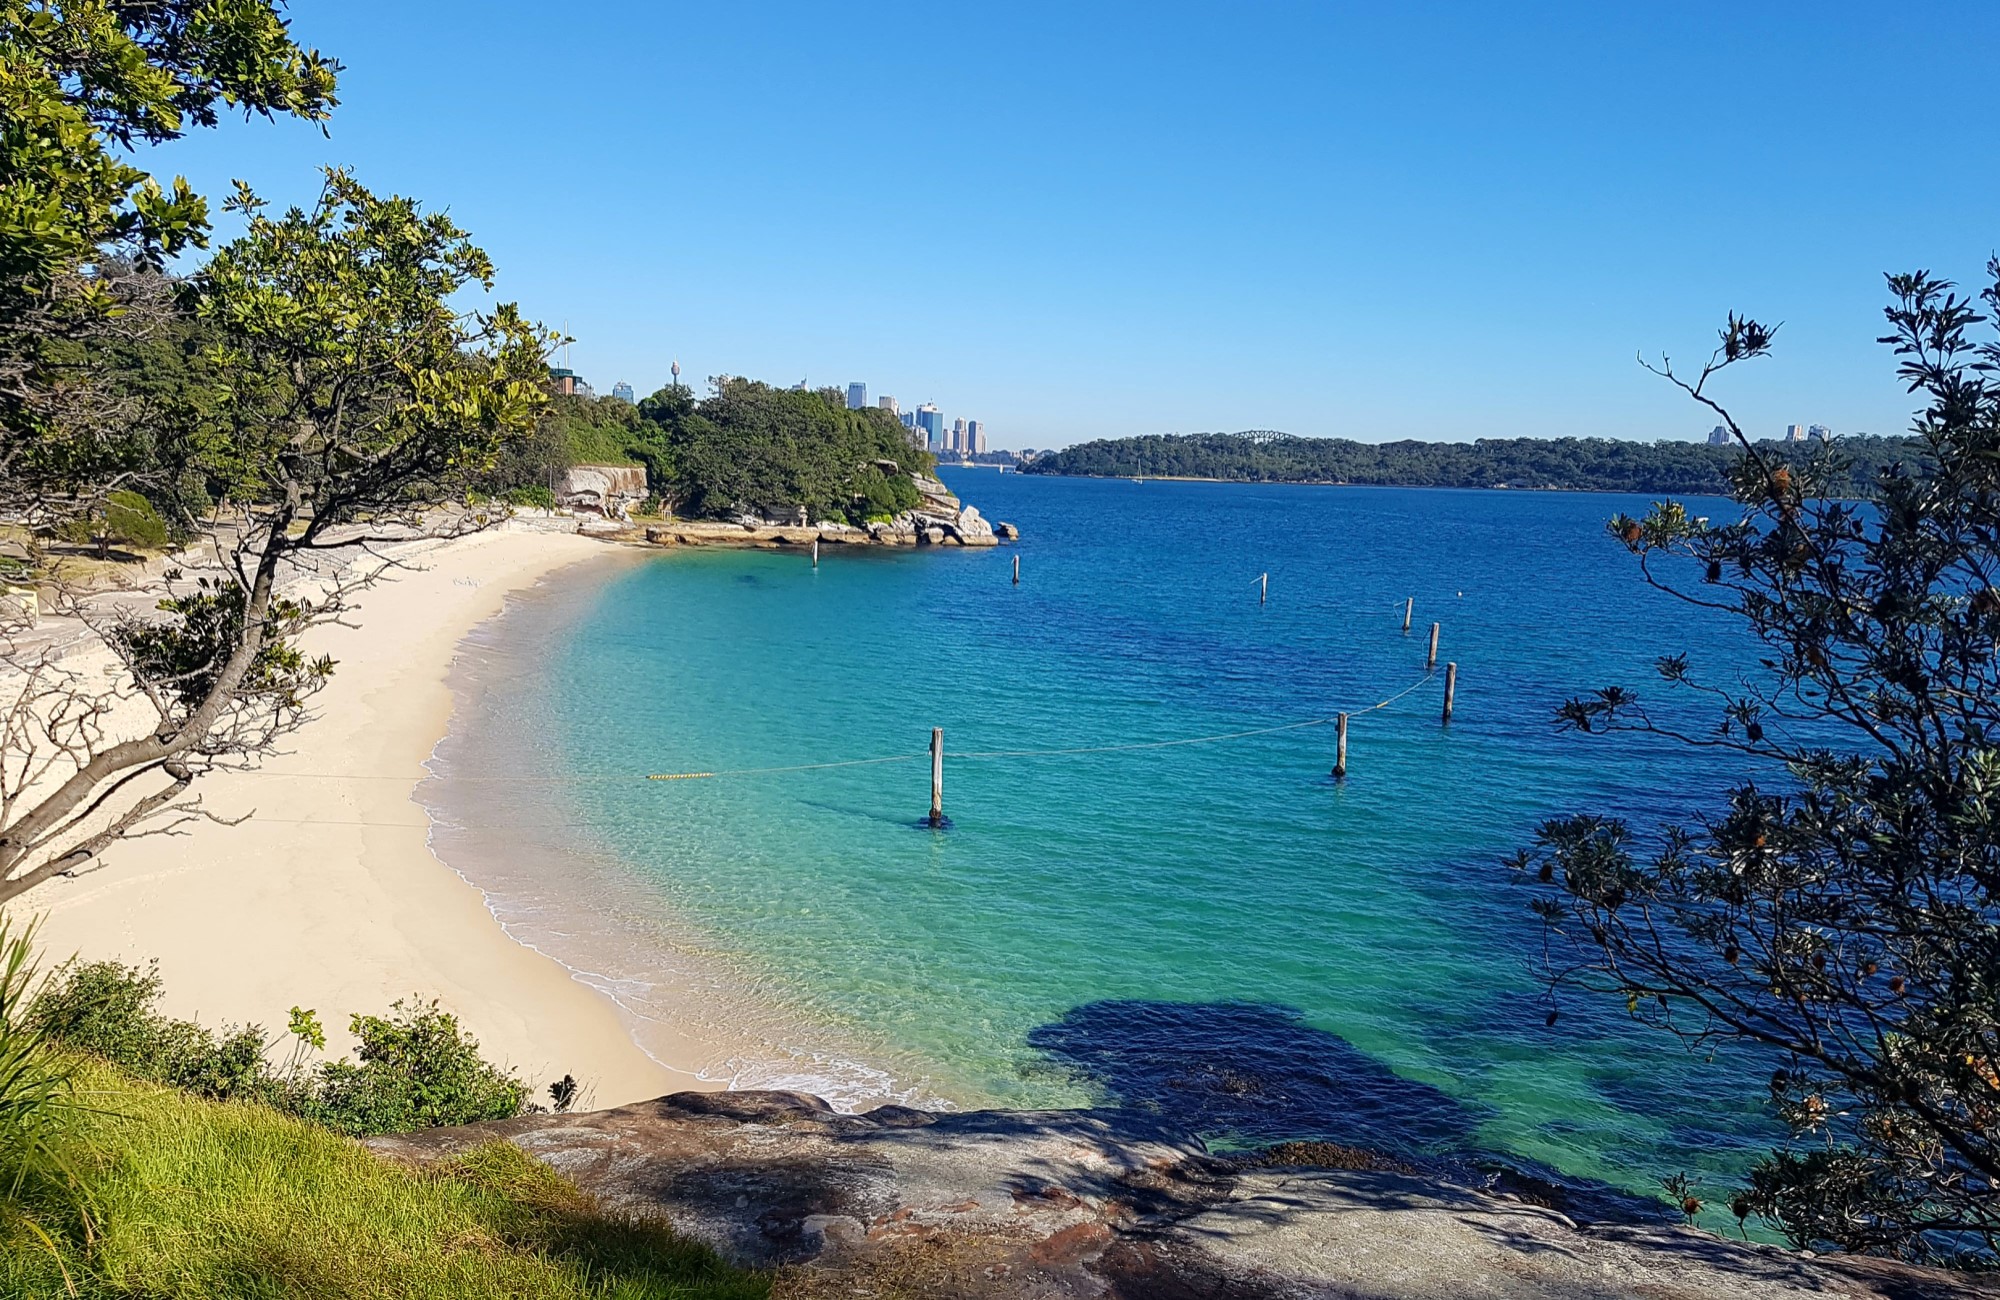 The view from Shakespeares Point in Sydney Harbour National Park. Photo: Amanda Cutlack &copy; OEH